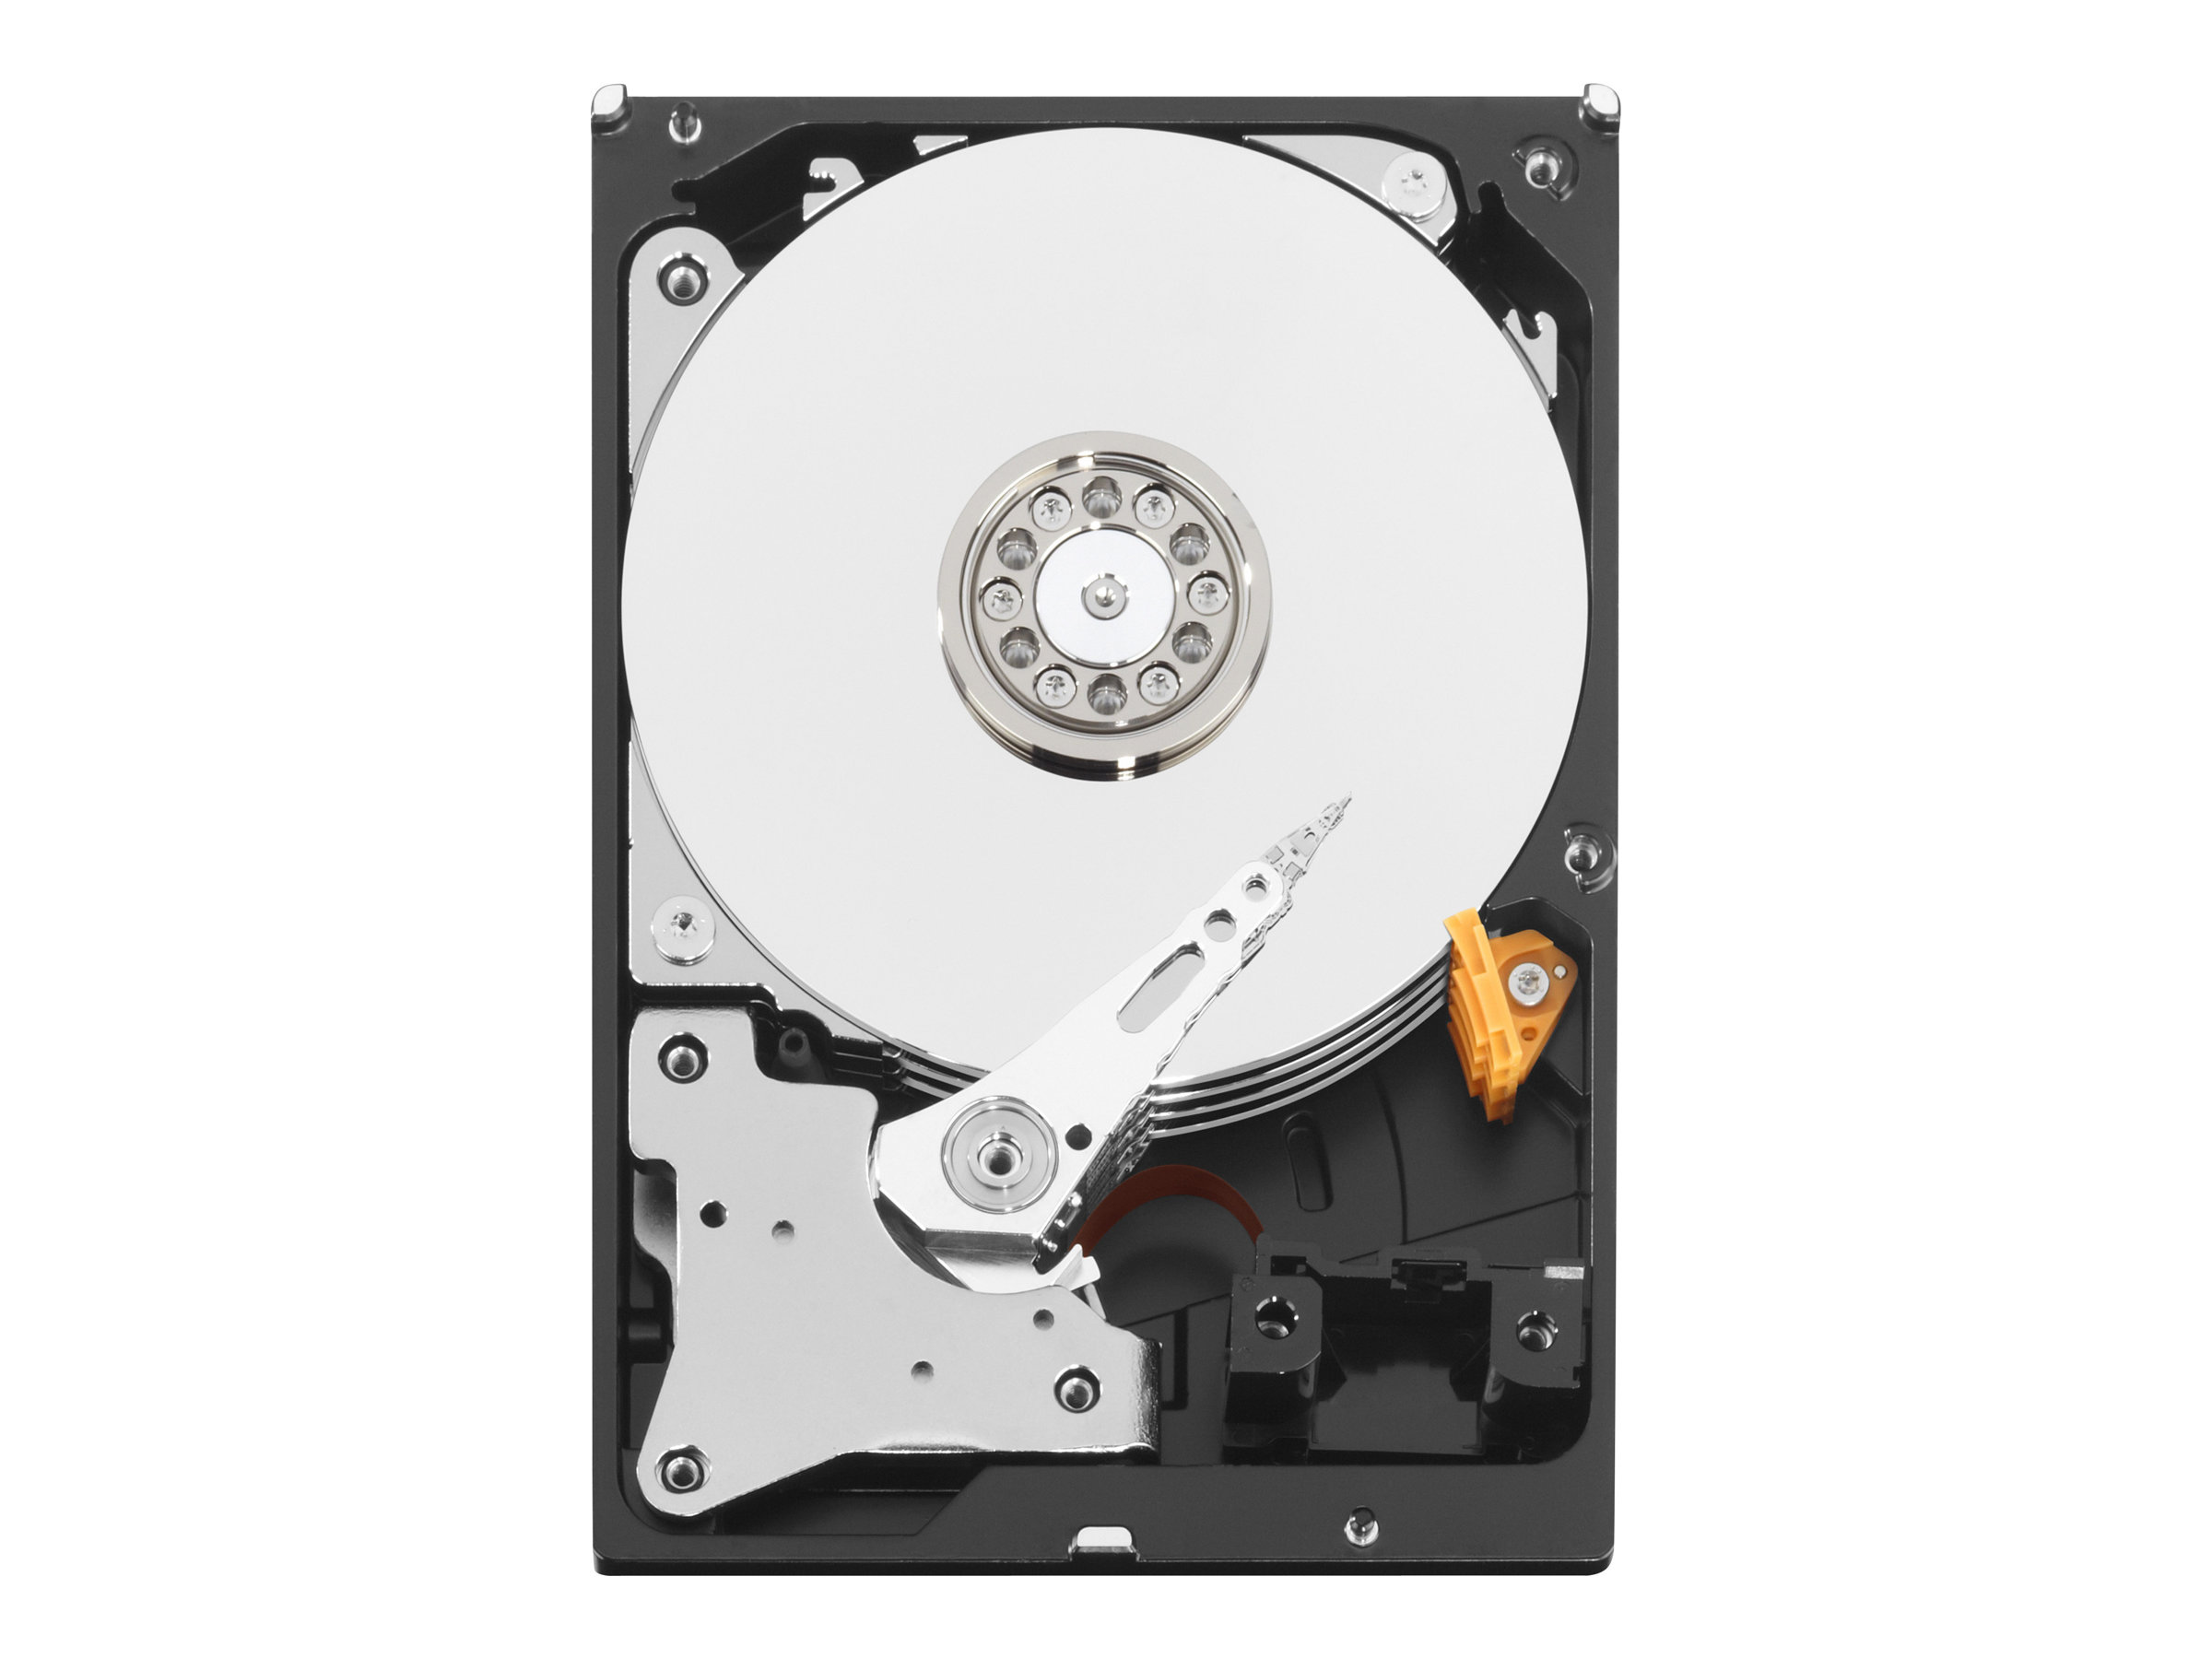 WD Red Plus Hard Drive WD20EFRX | www.shi.com